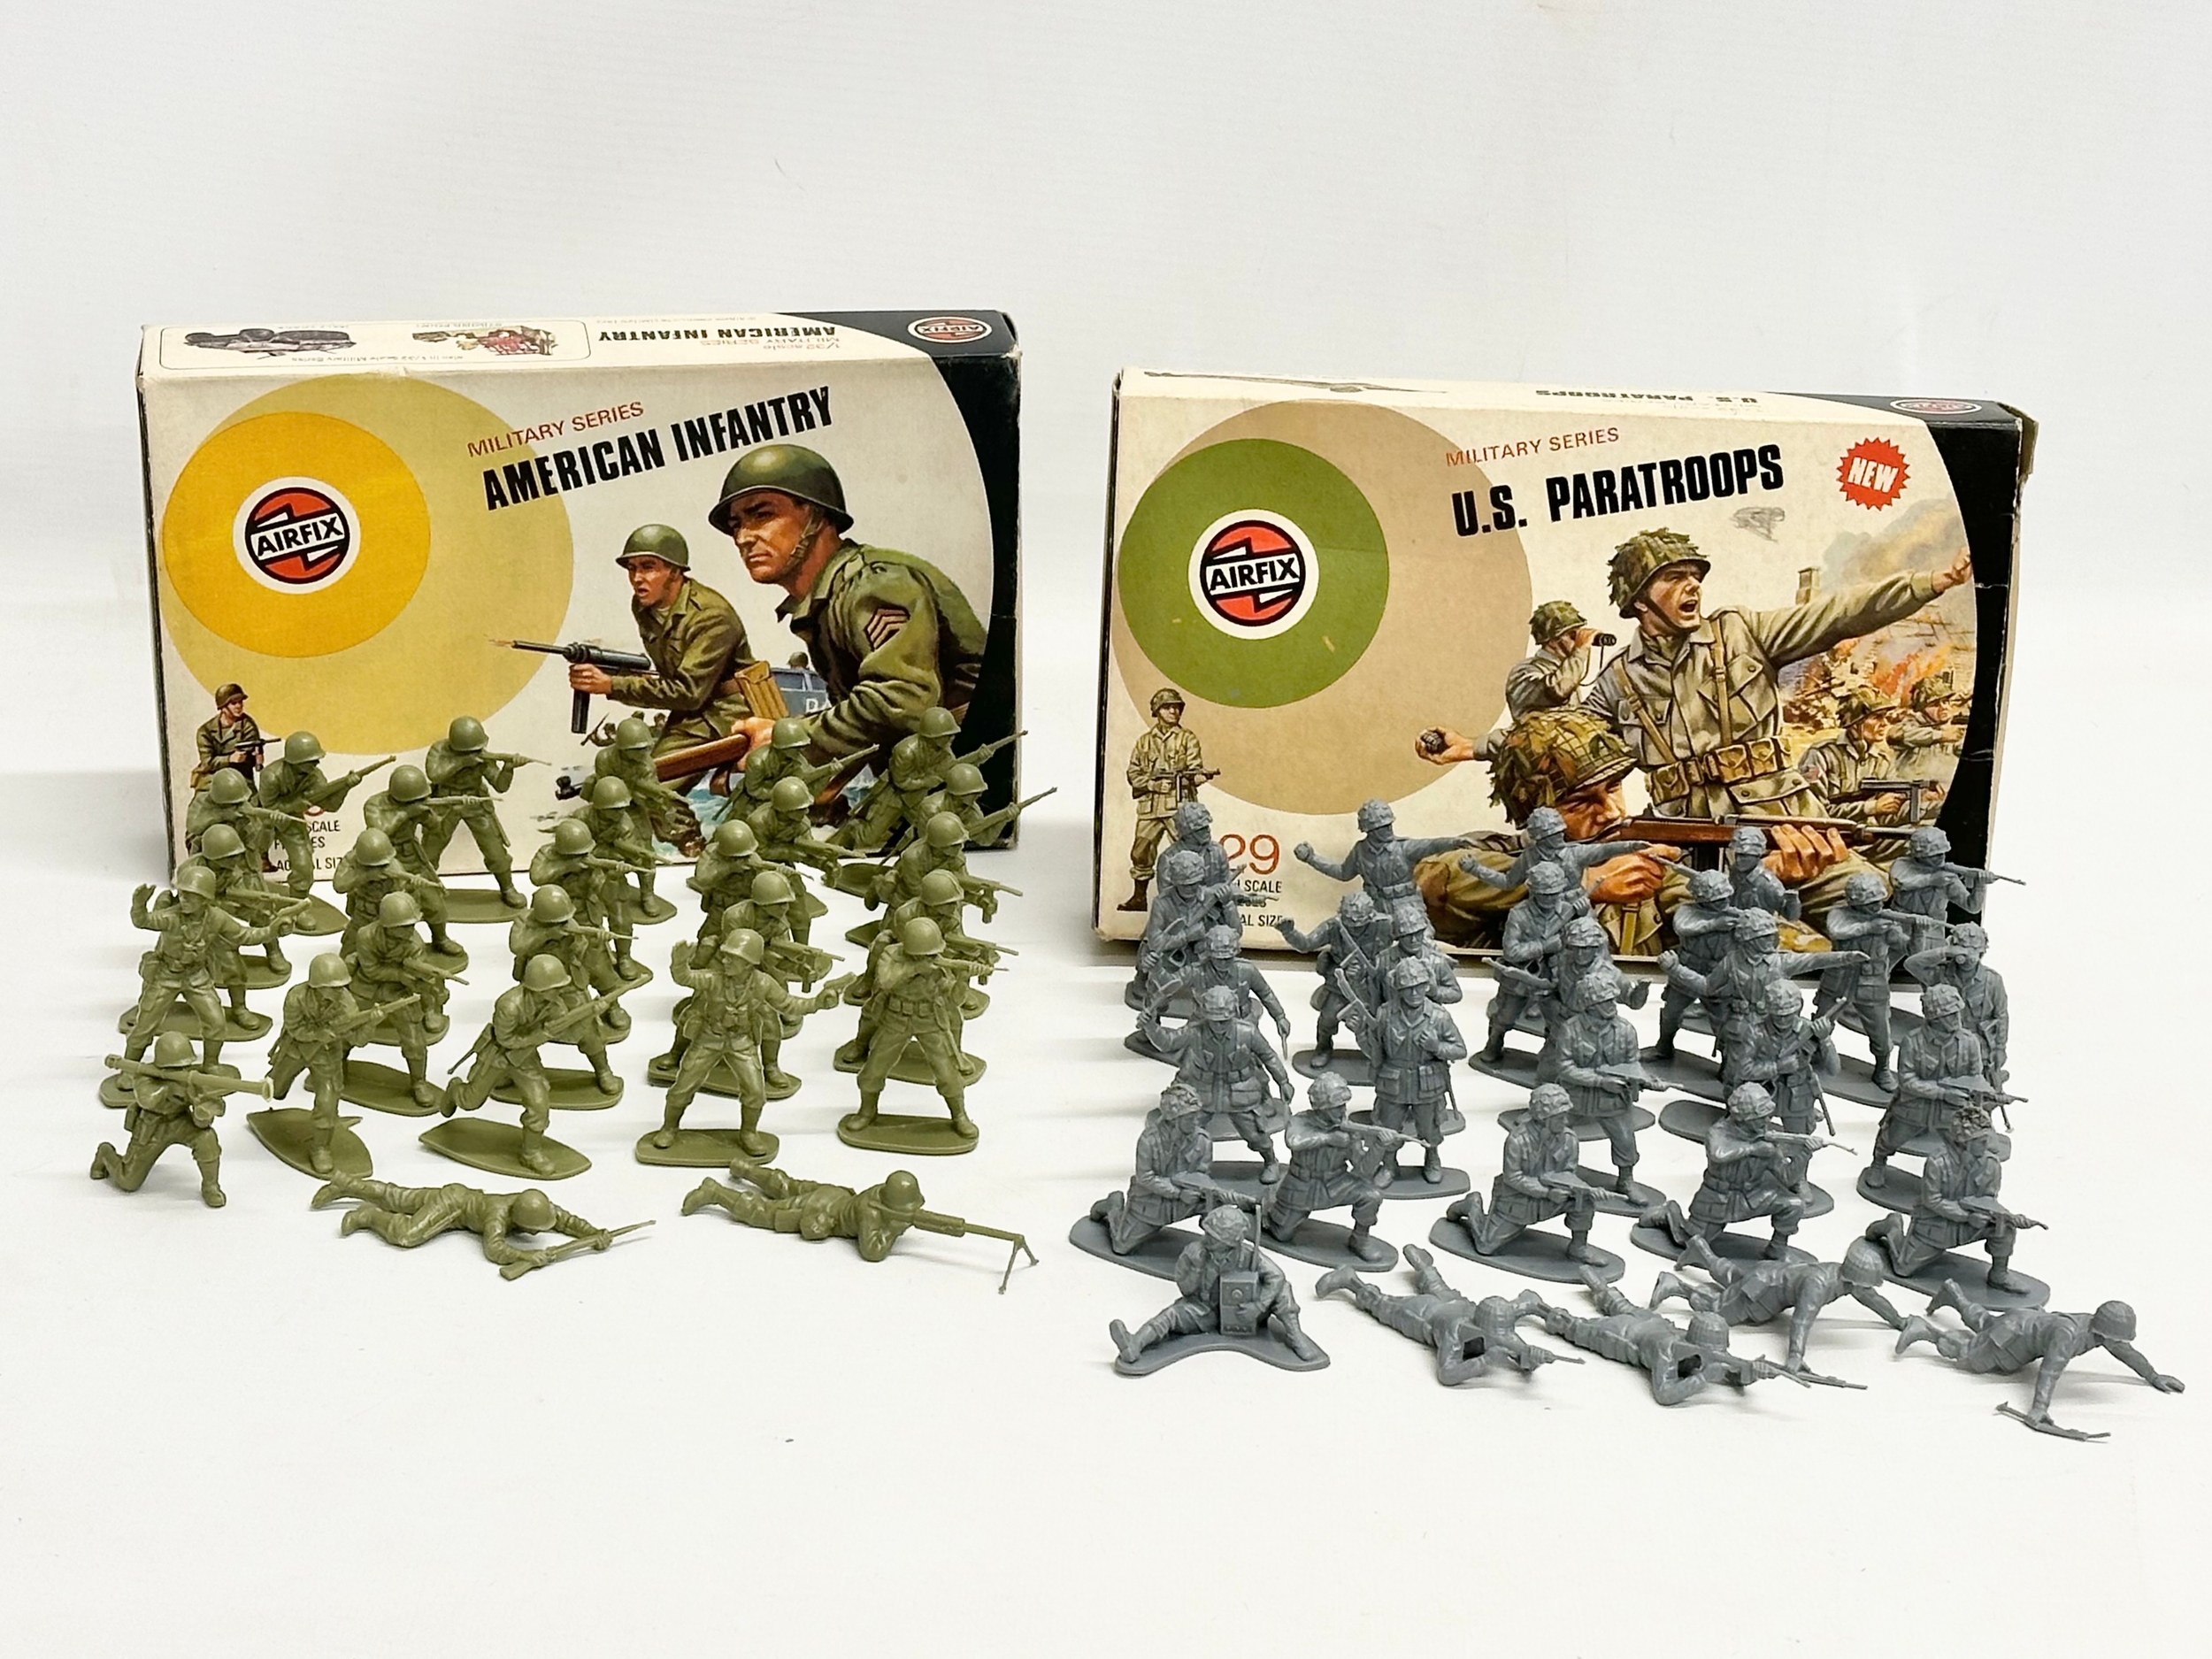 2 boxes of vintage Airfix WWII soldiers. Airfix Military Series U.S Paratroops, 30 pieces. Airfix